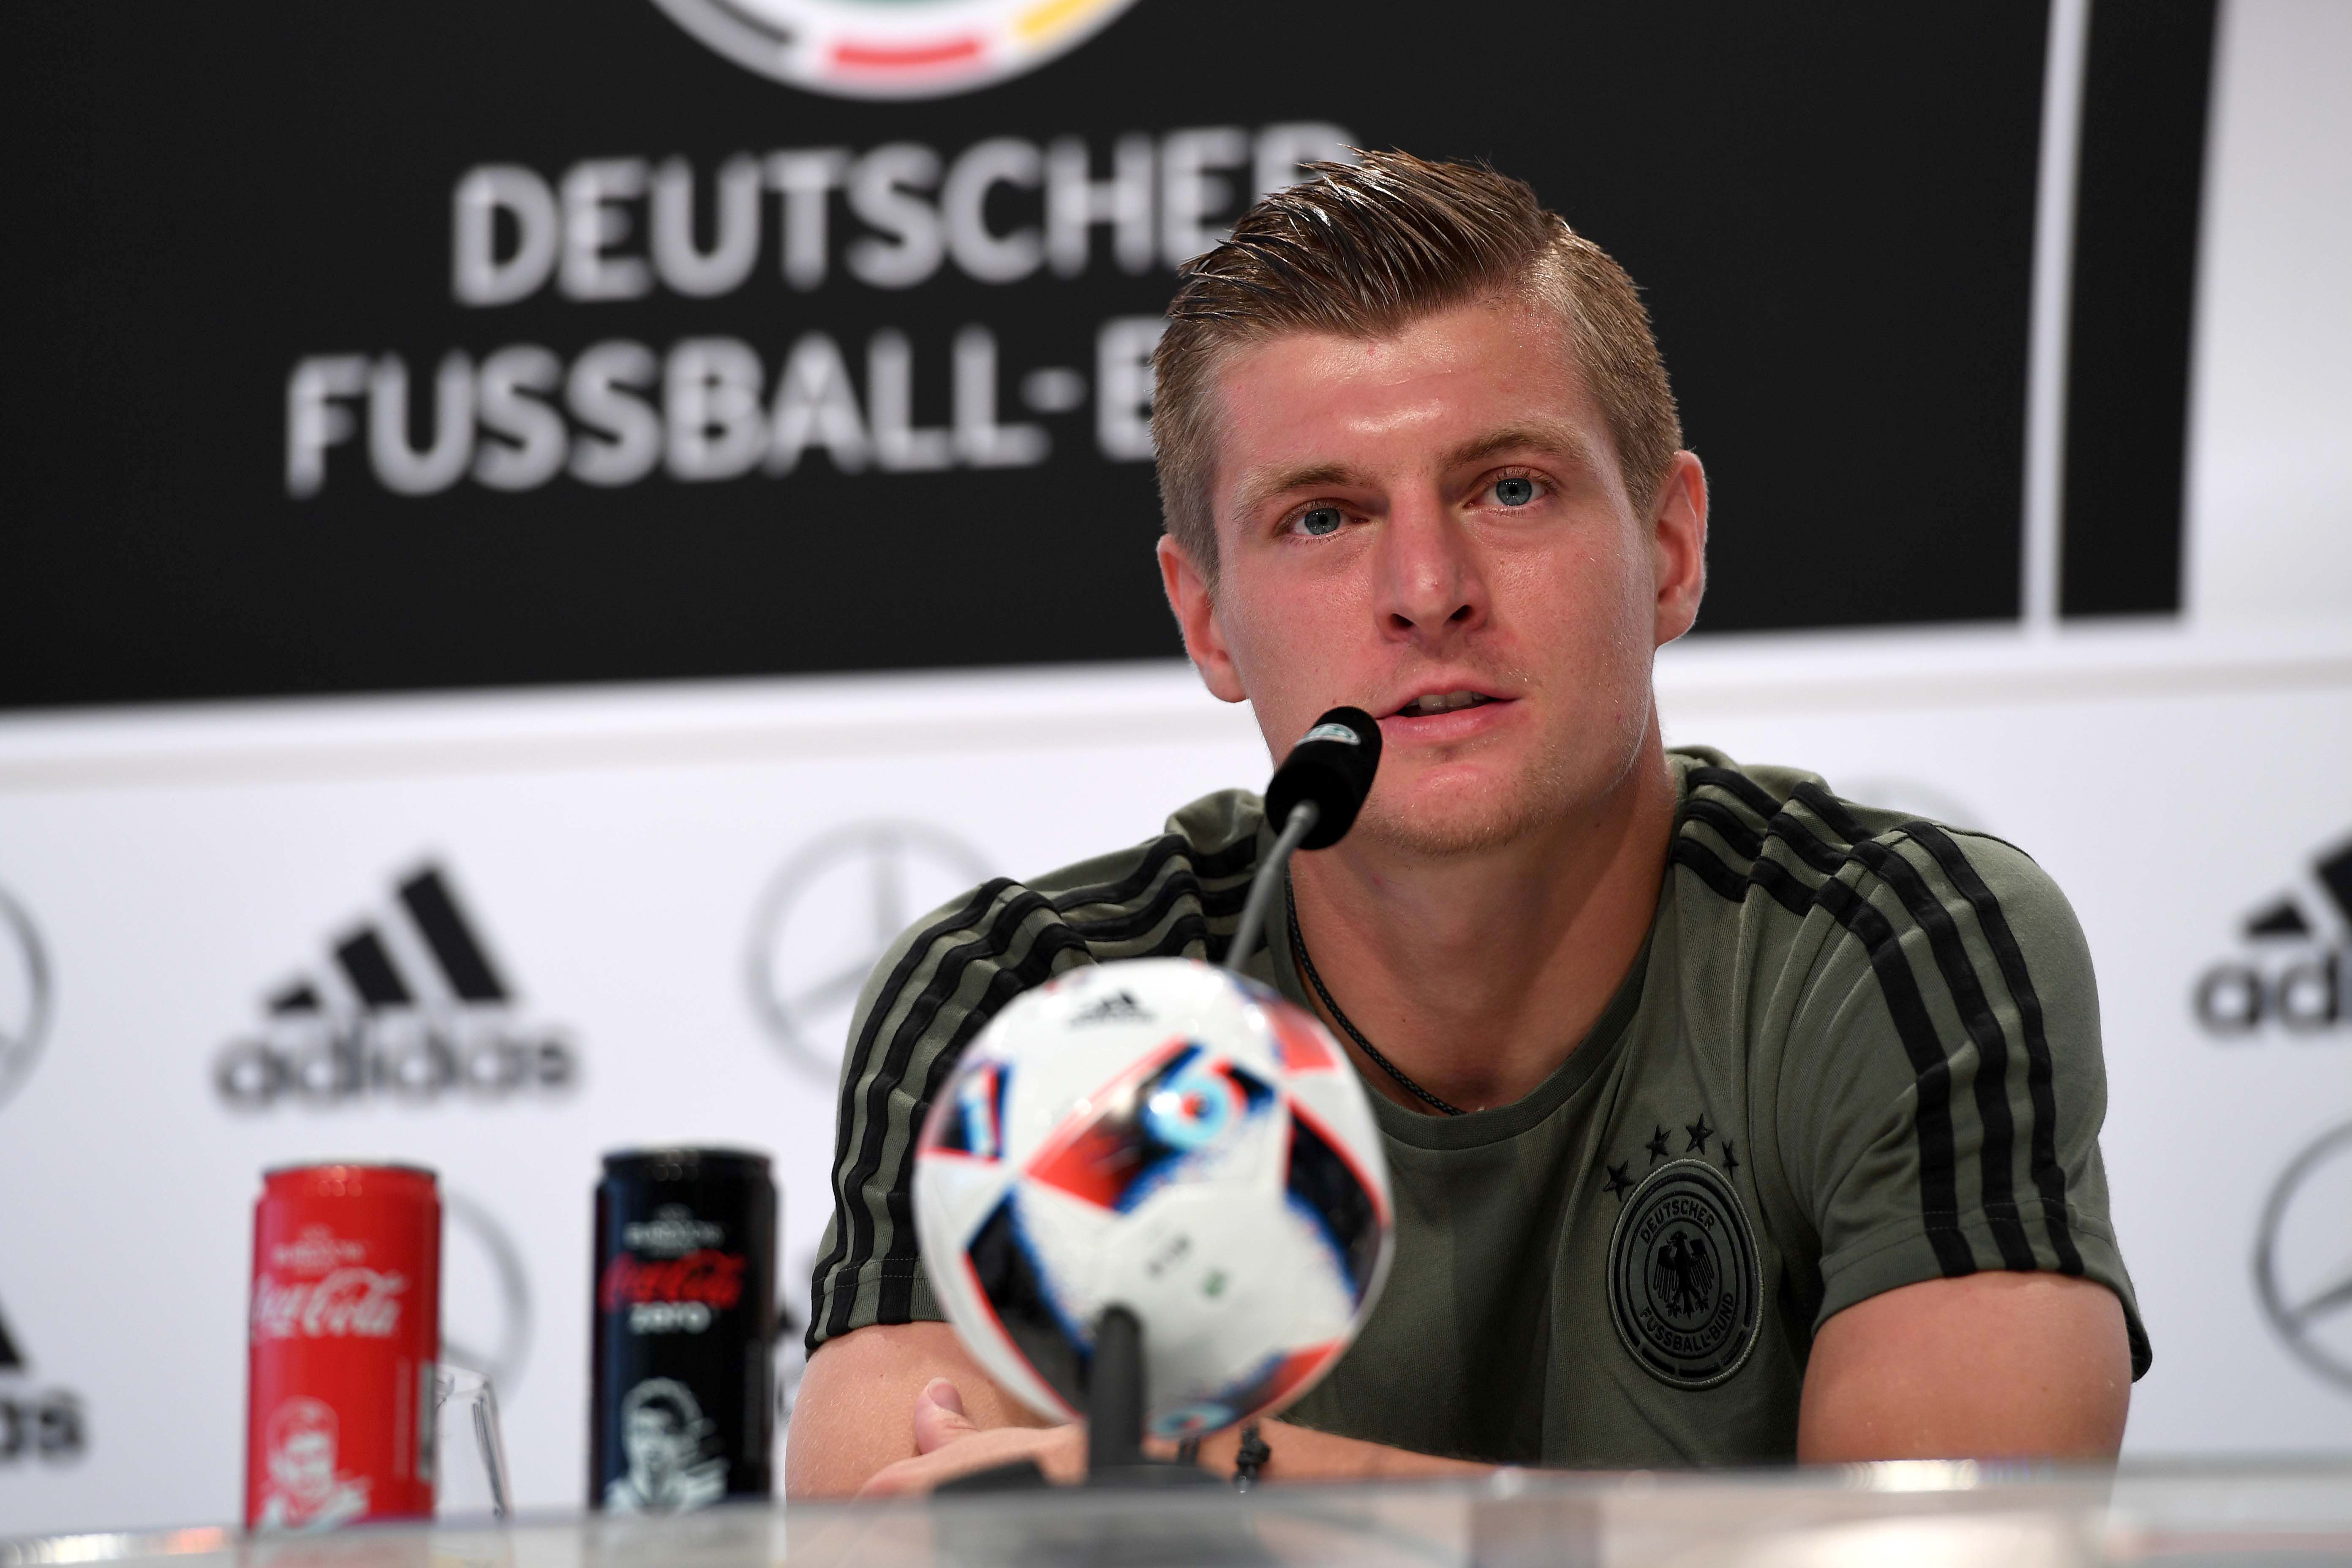 Euro 2016: Italy are not my bogey team, says Germany's Kroos